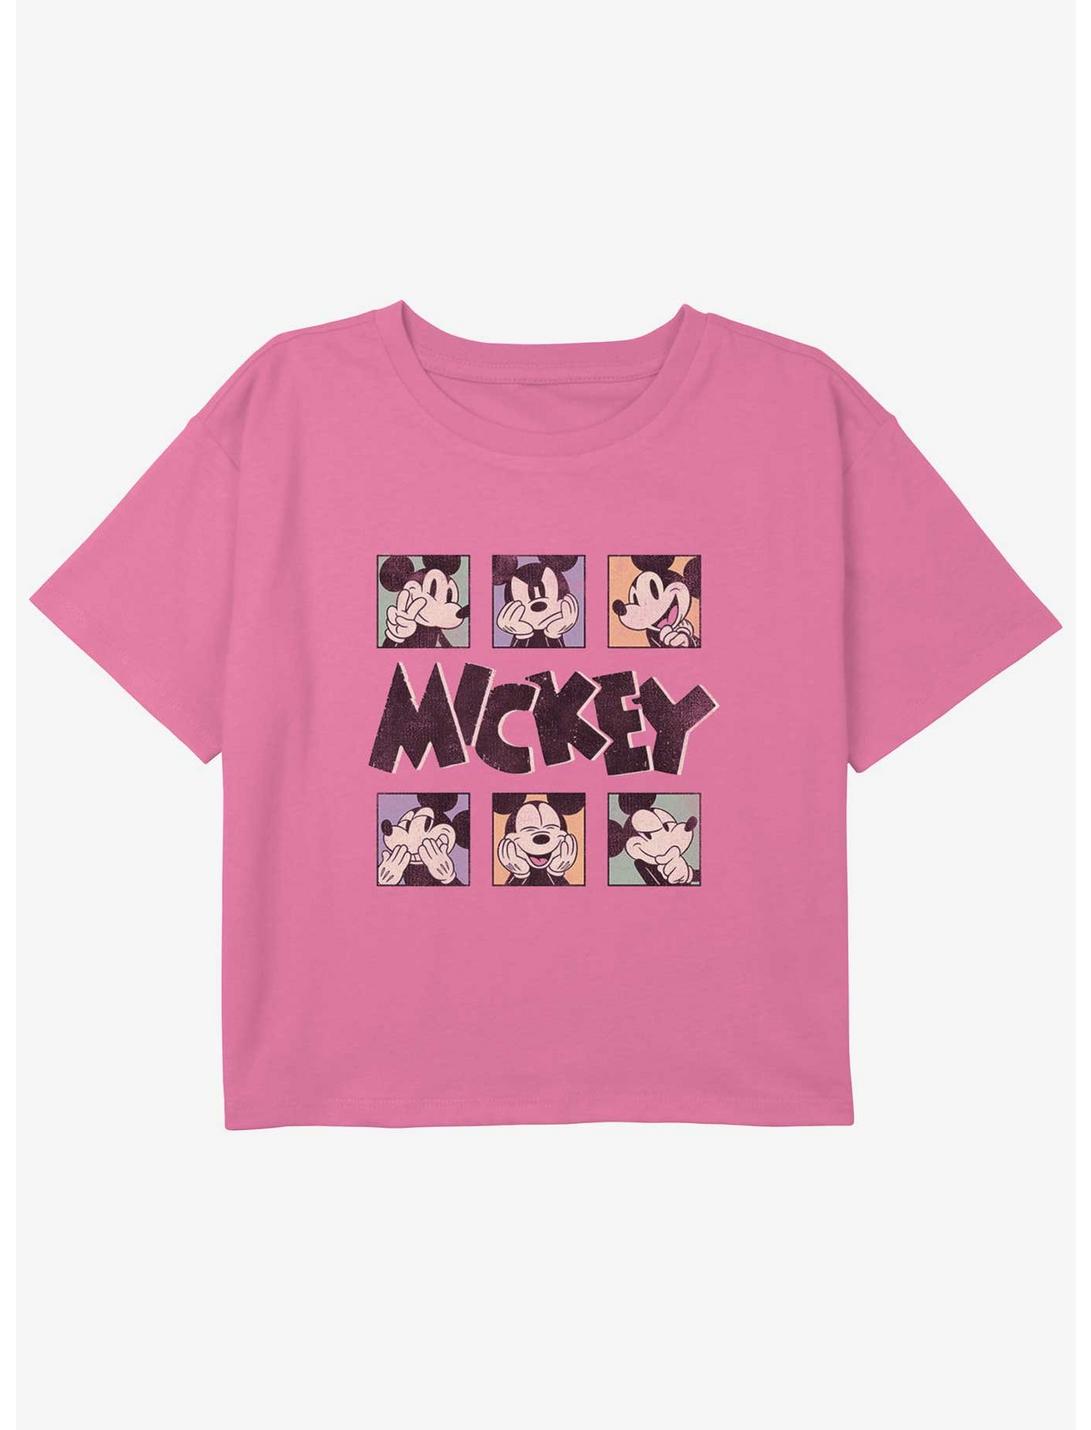 Disney Mickey Mouse Mickey Faces Girls Youth Crop T-Shirt, PINK, hi-res